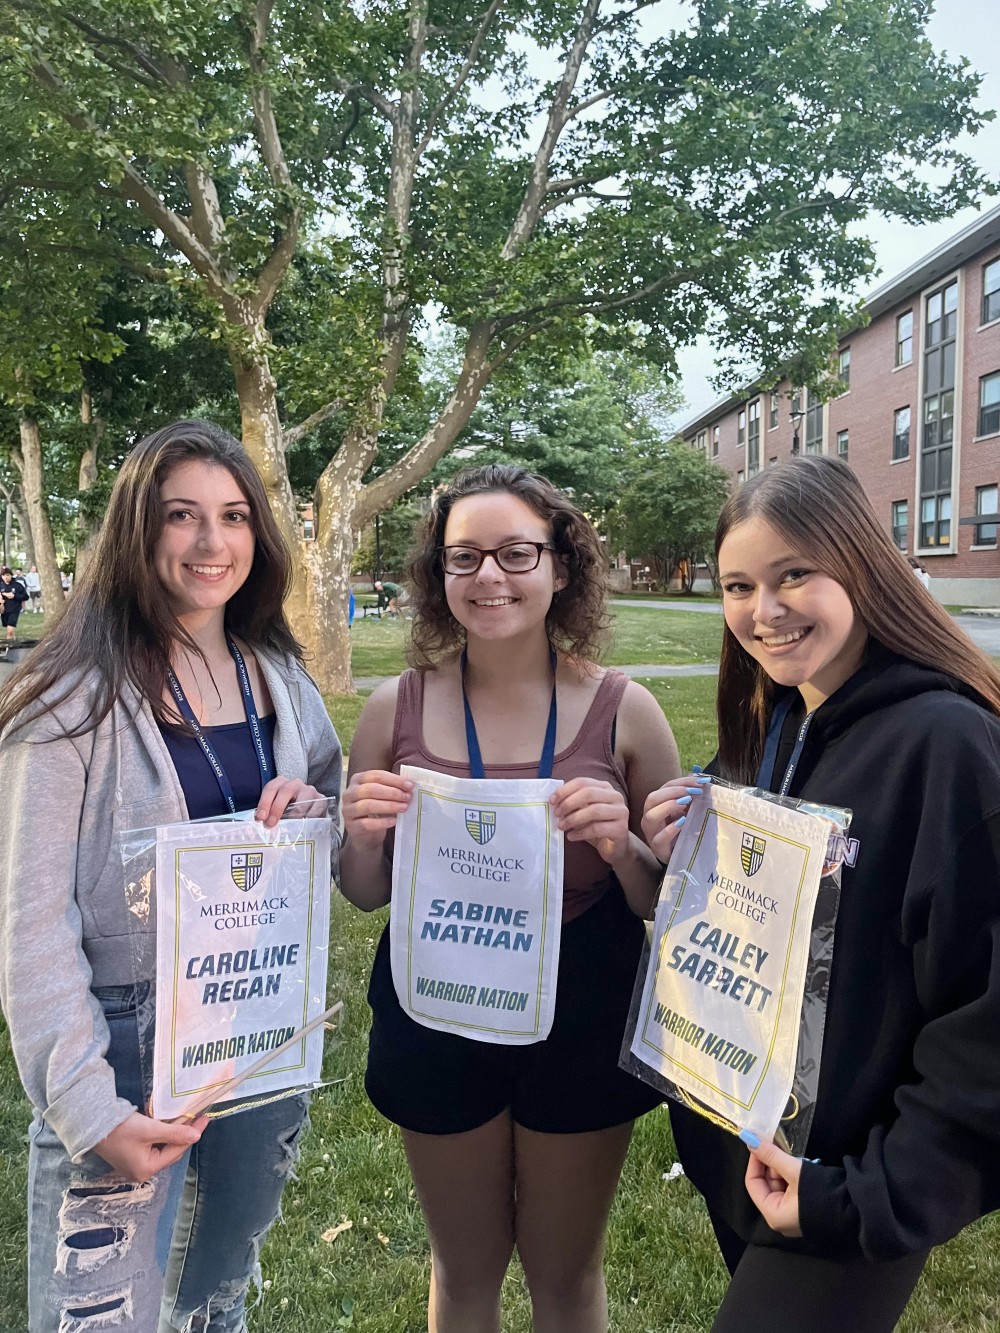 Cailey, Sabine, and Caroline holding their personalized banners at Merrimack College new student orientation on 6/20/22.